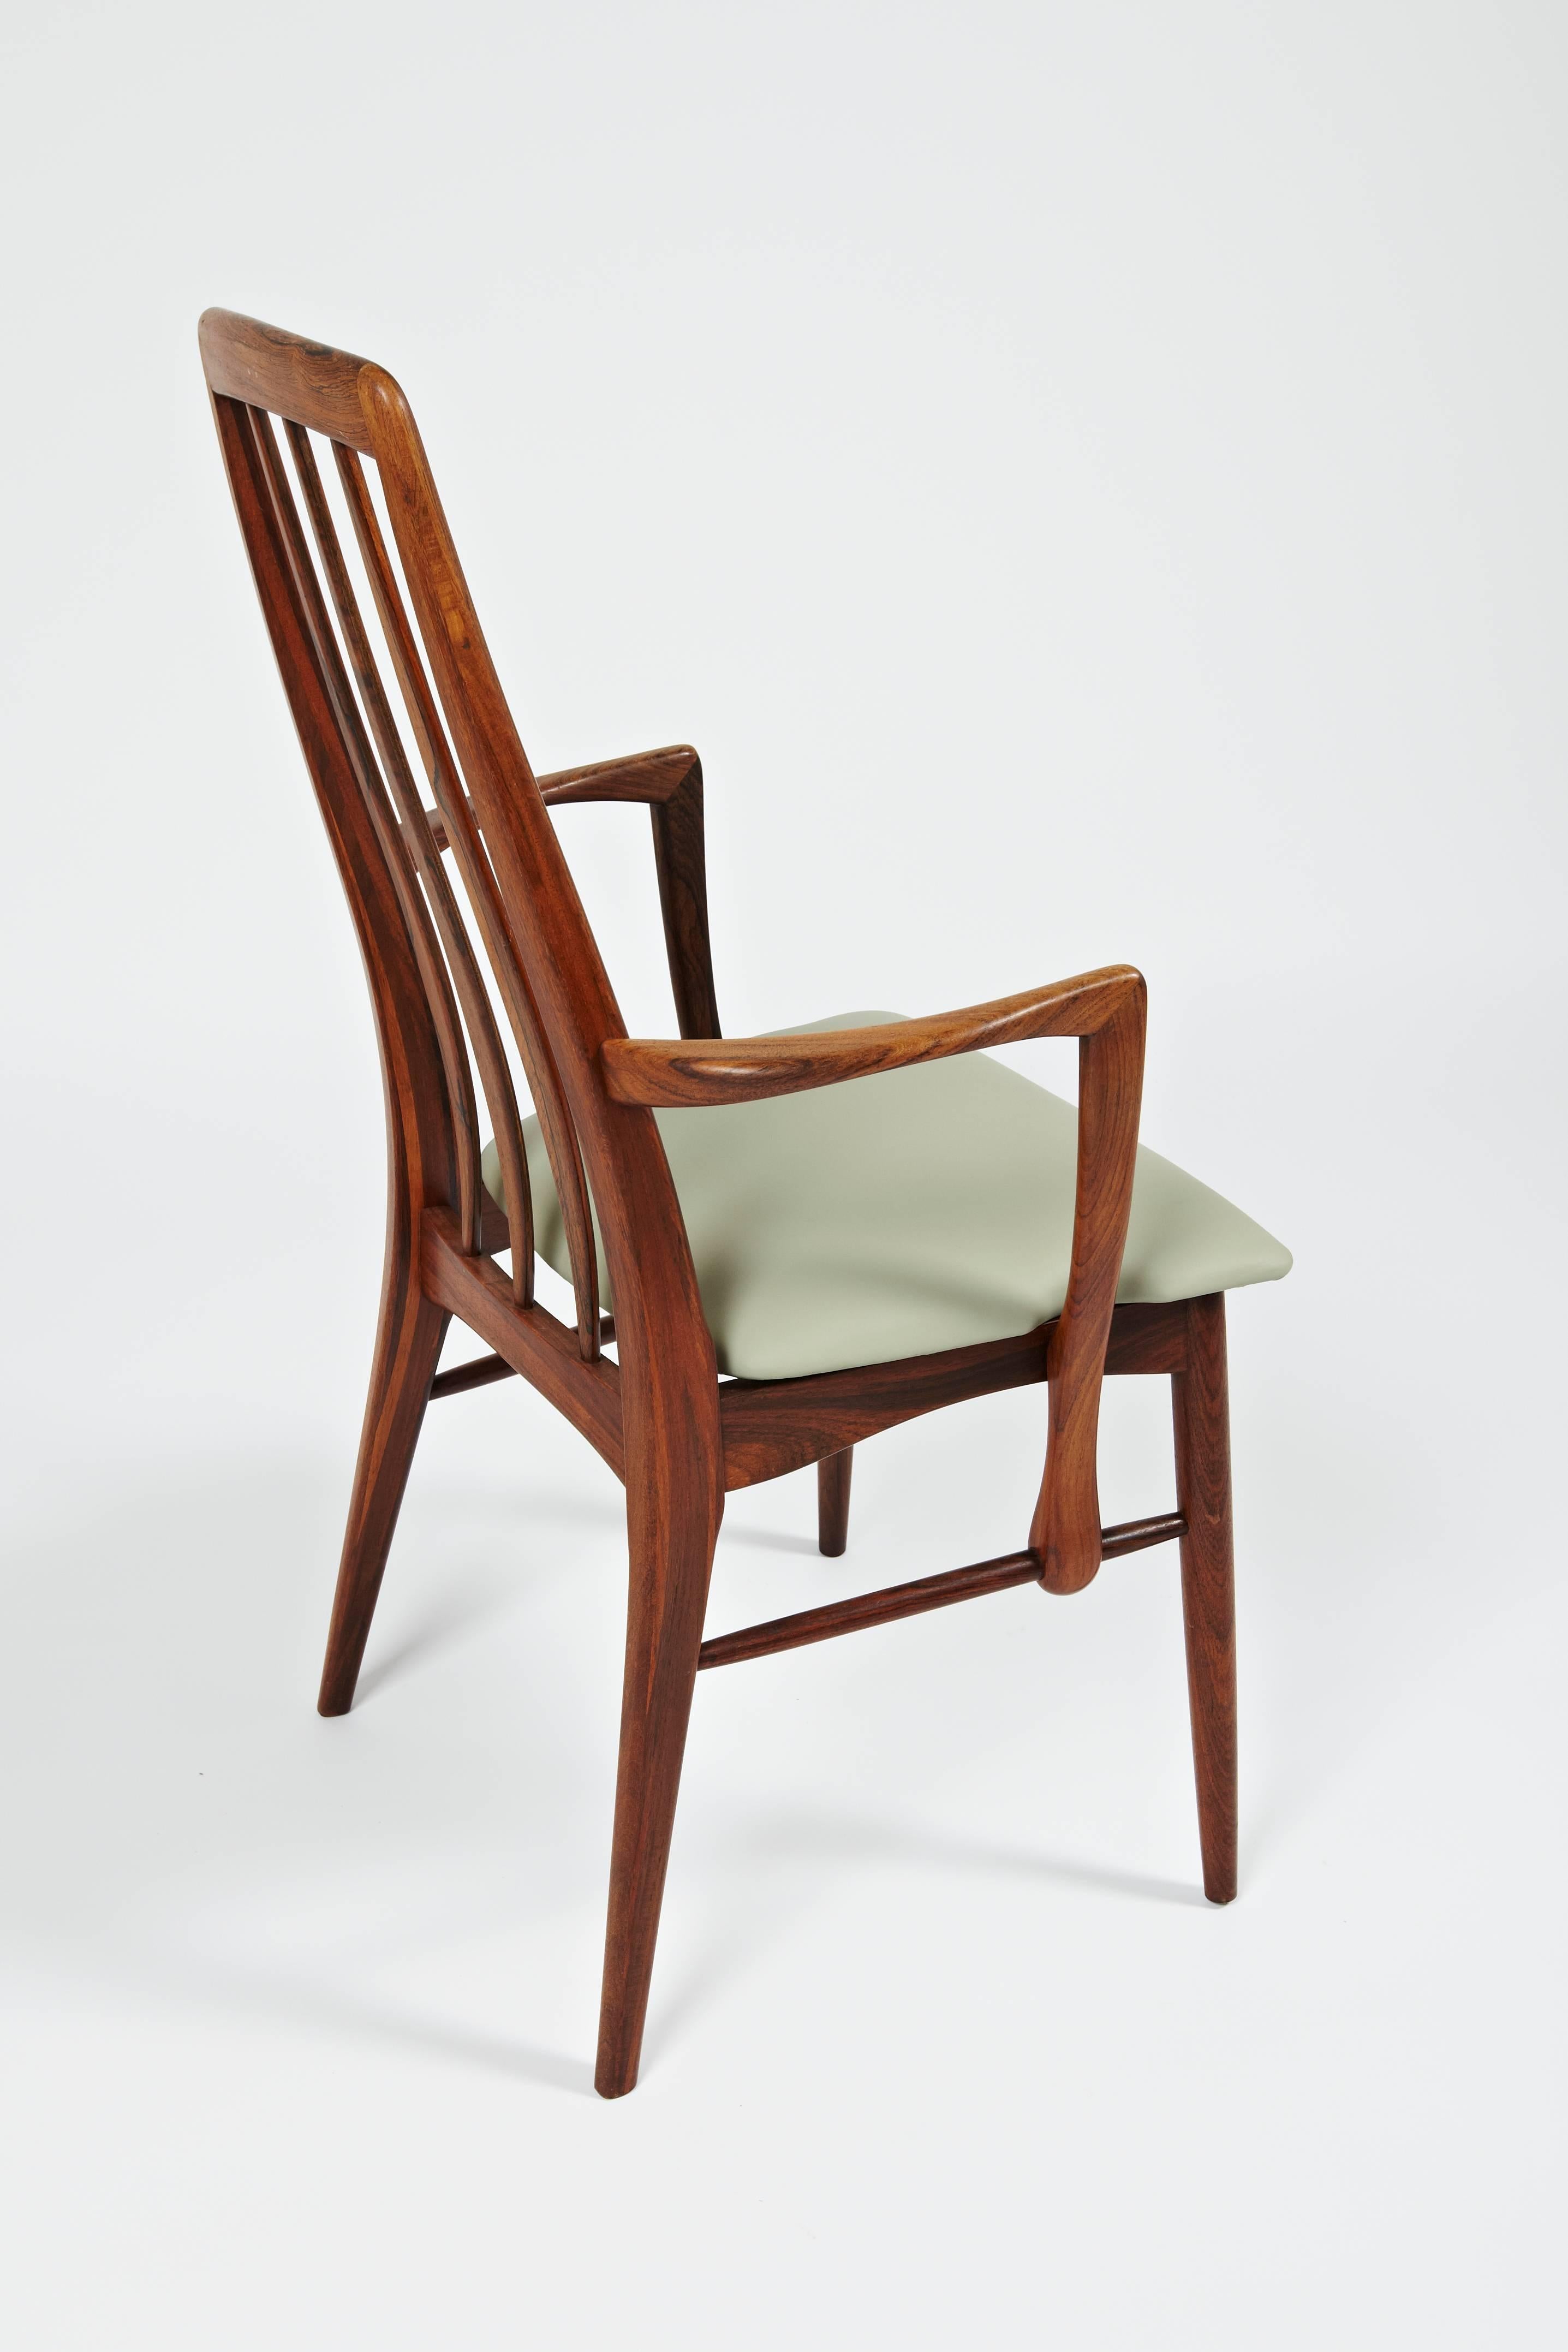 Mid-20th Century Niels Kofoed Rosewood Dining Chair with Arms, circa 1964 For Sale